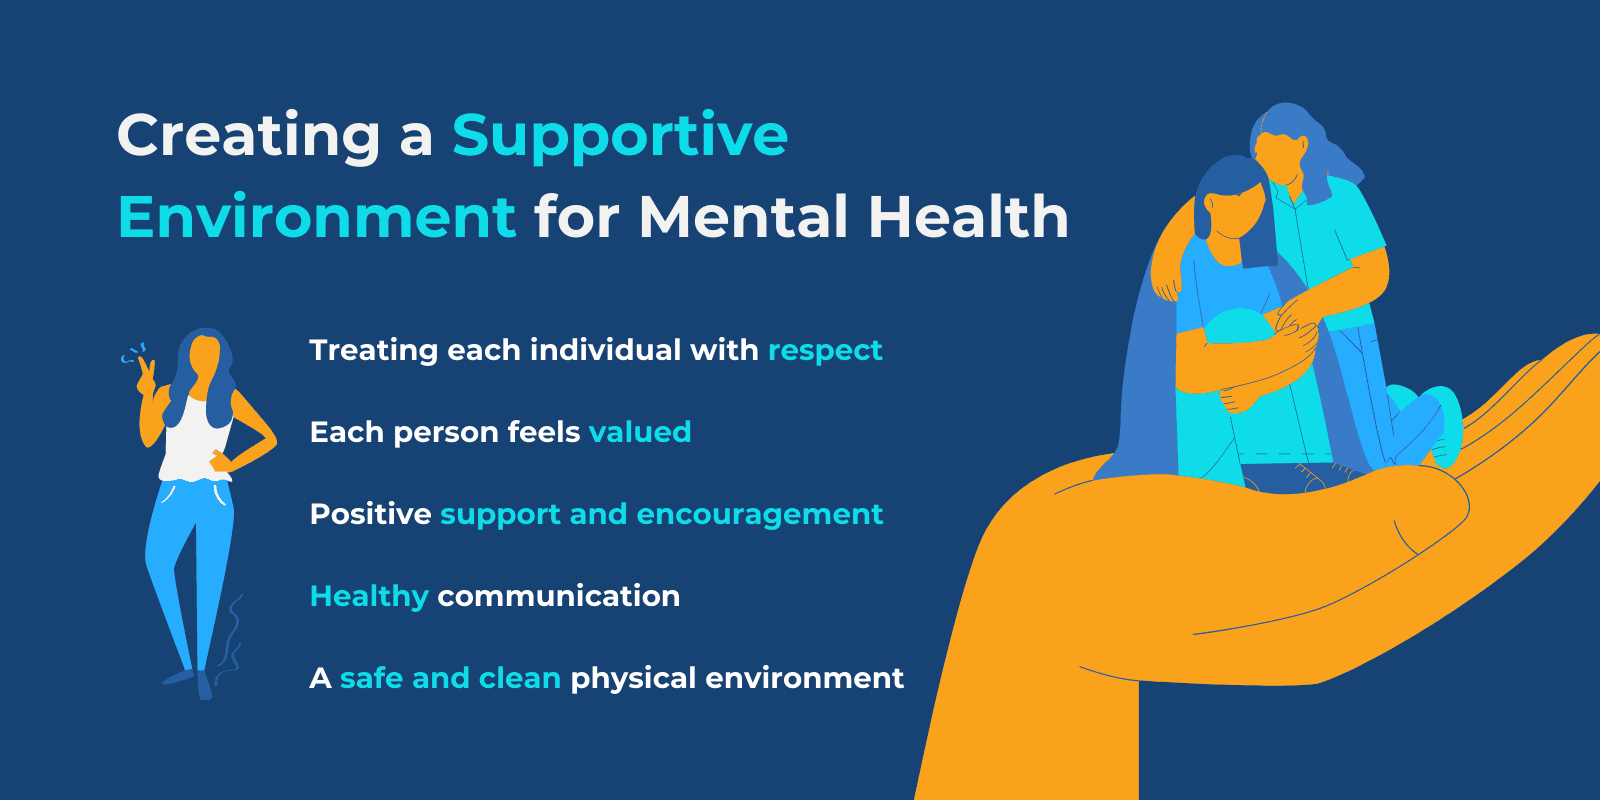 Creating a Supportive Environment for Mental Health demonstrated with relevant graphics around them